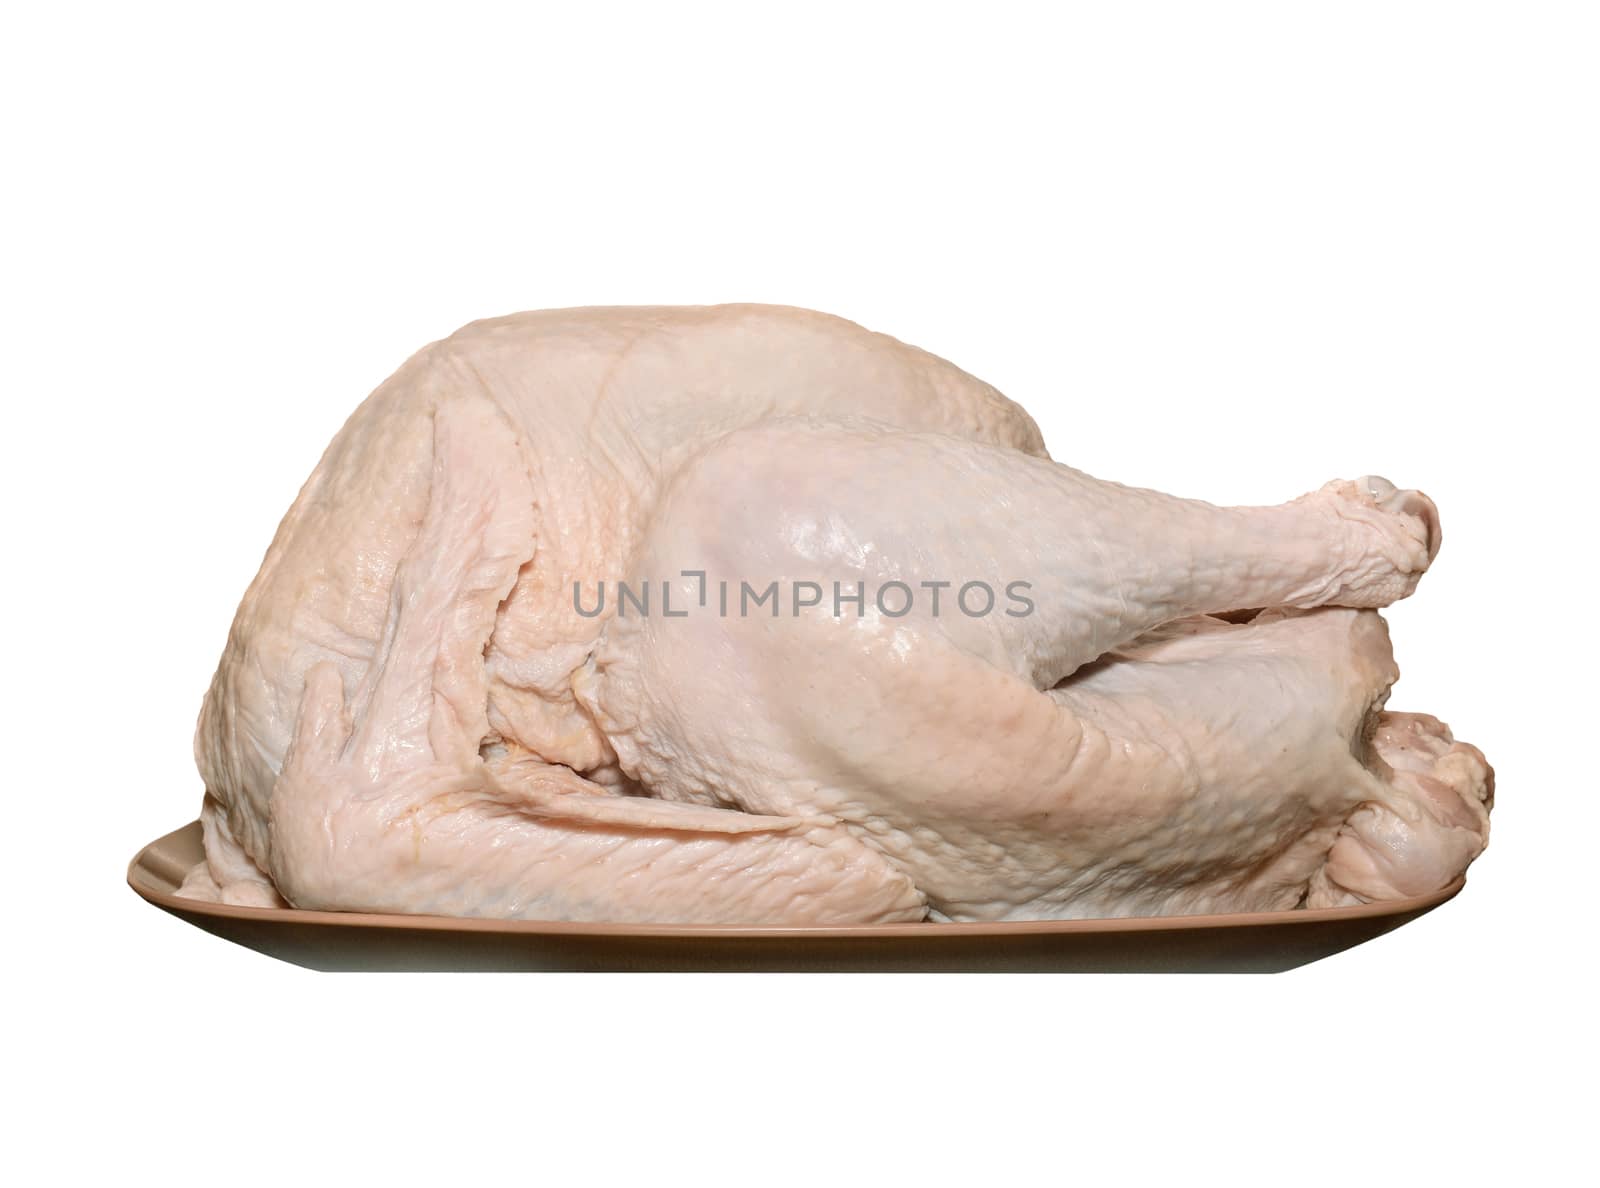 Closeup of an uncooked turkey on a platter. A traditional Thanksgiving staple ready for seasoning and roasting.